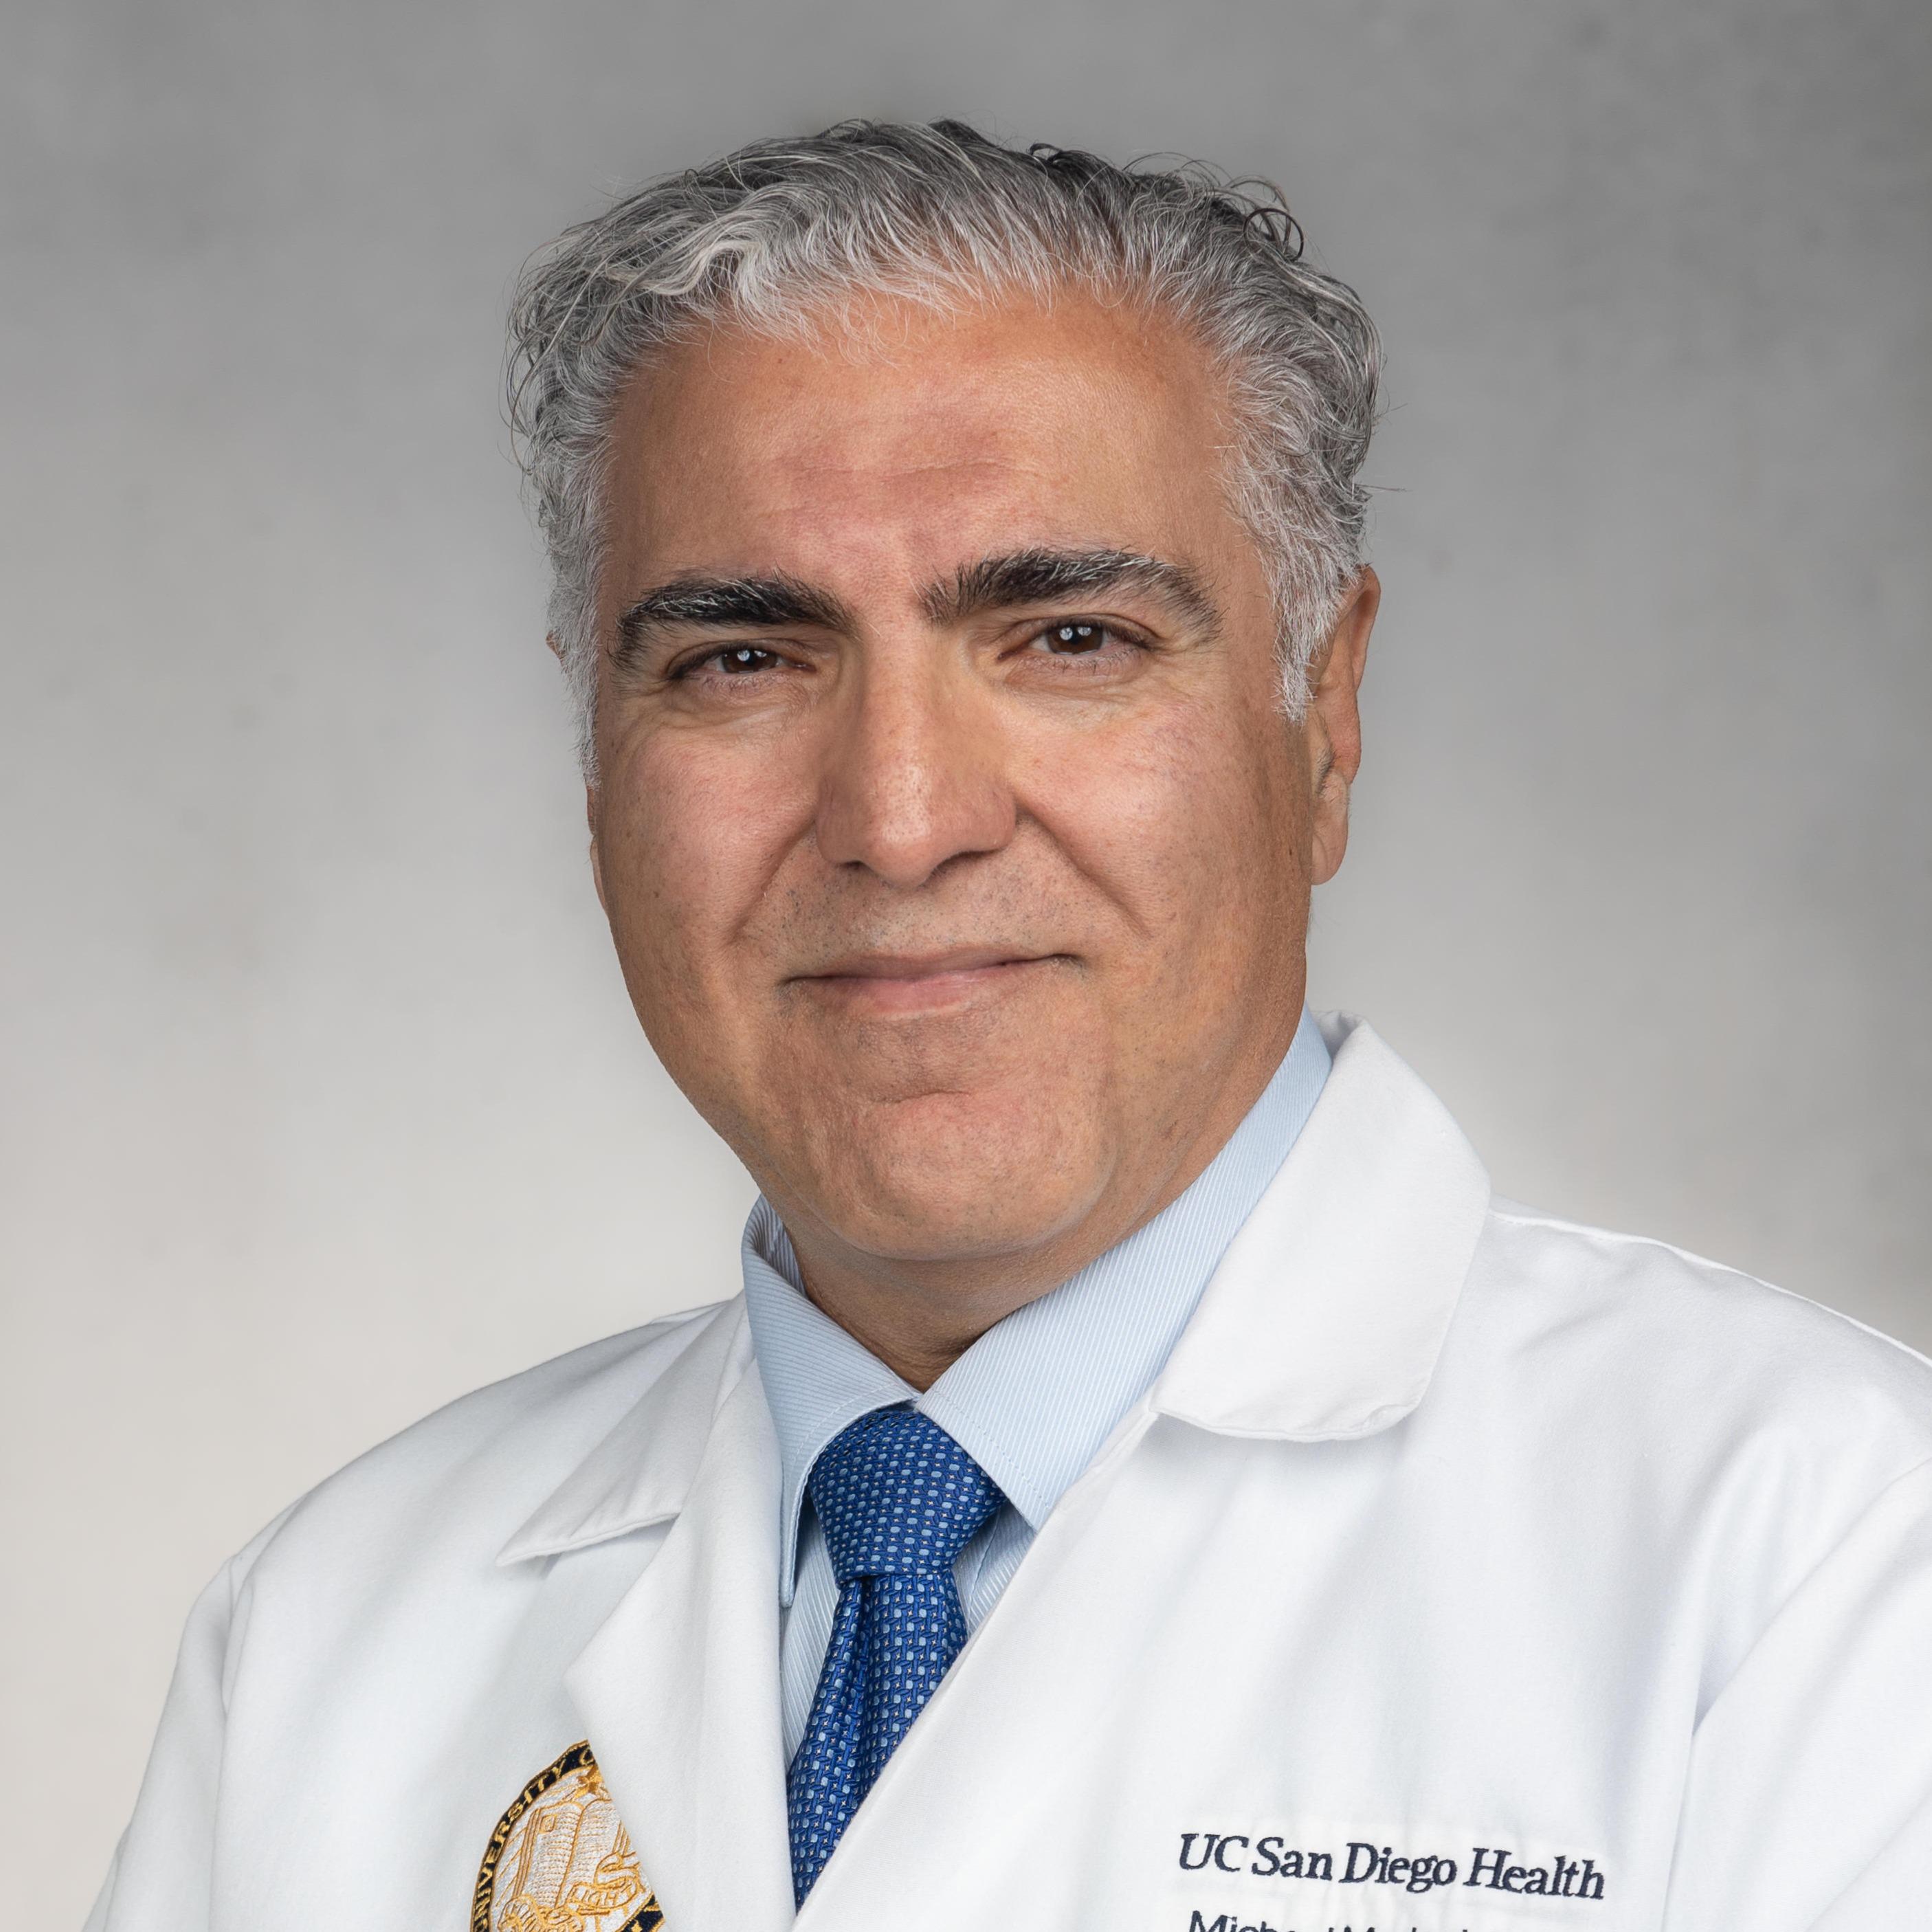 Michael M Madani Md Facs Cardiothoracic Heart And Lung Surgery Uc San Diego Health 